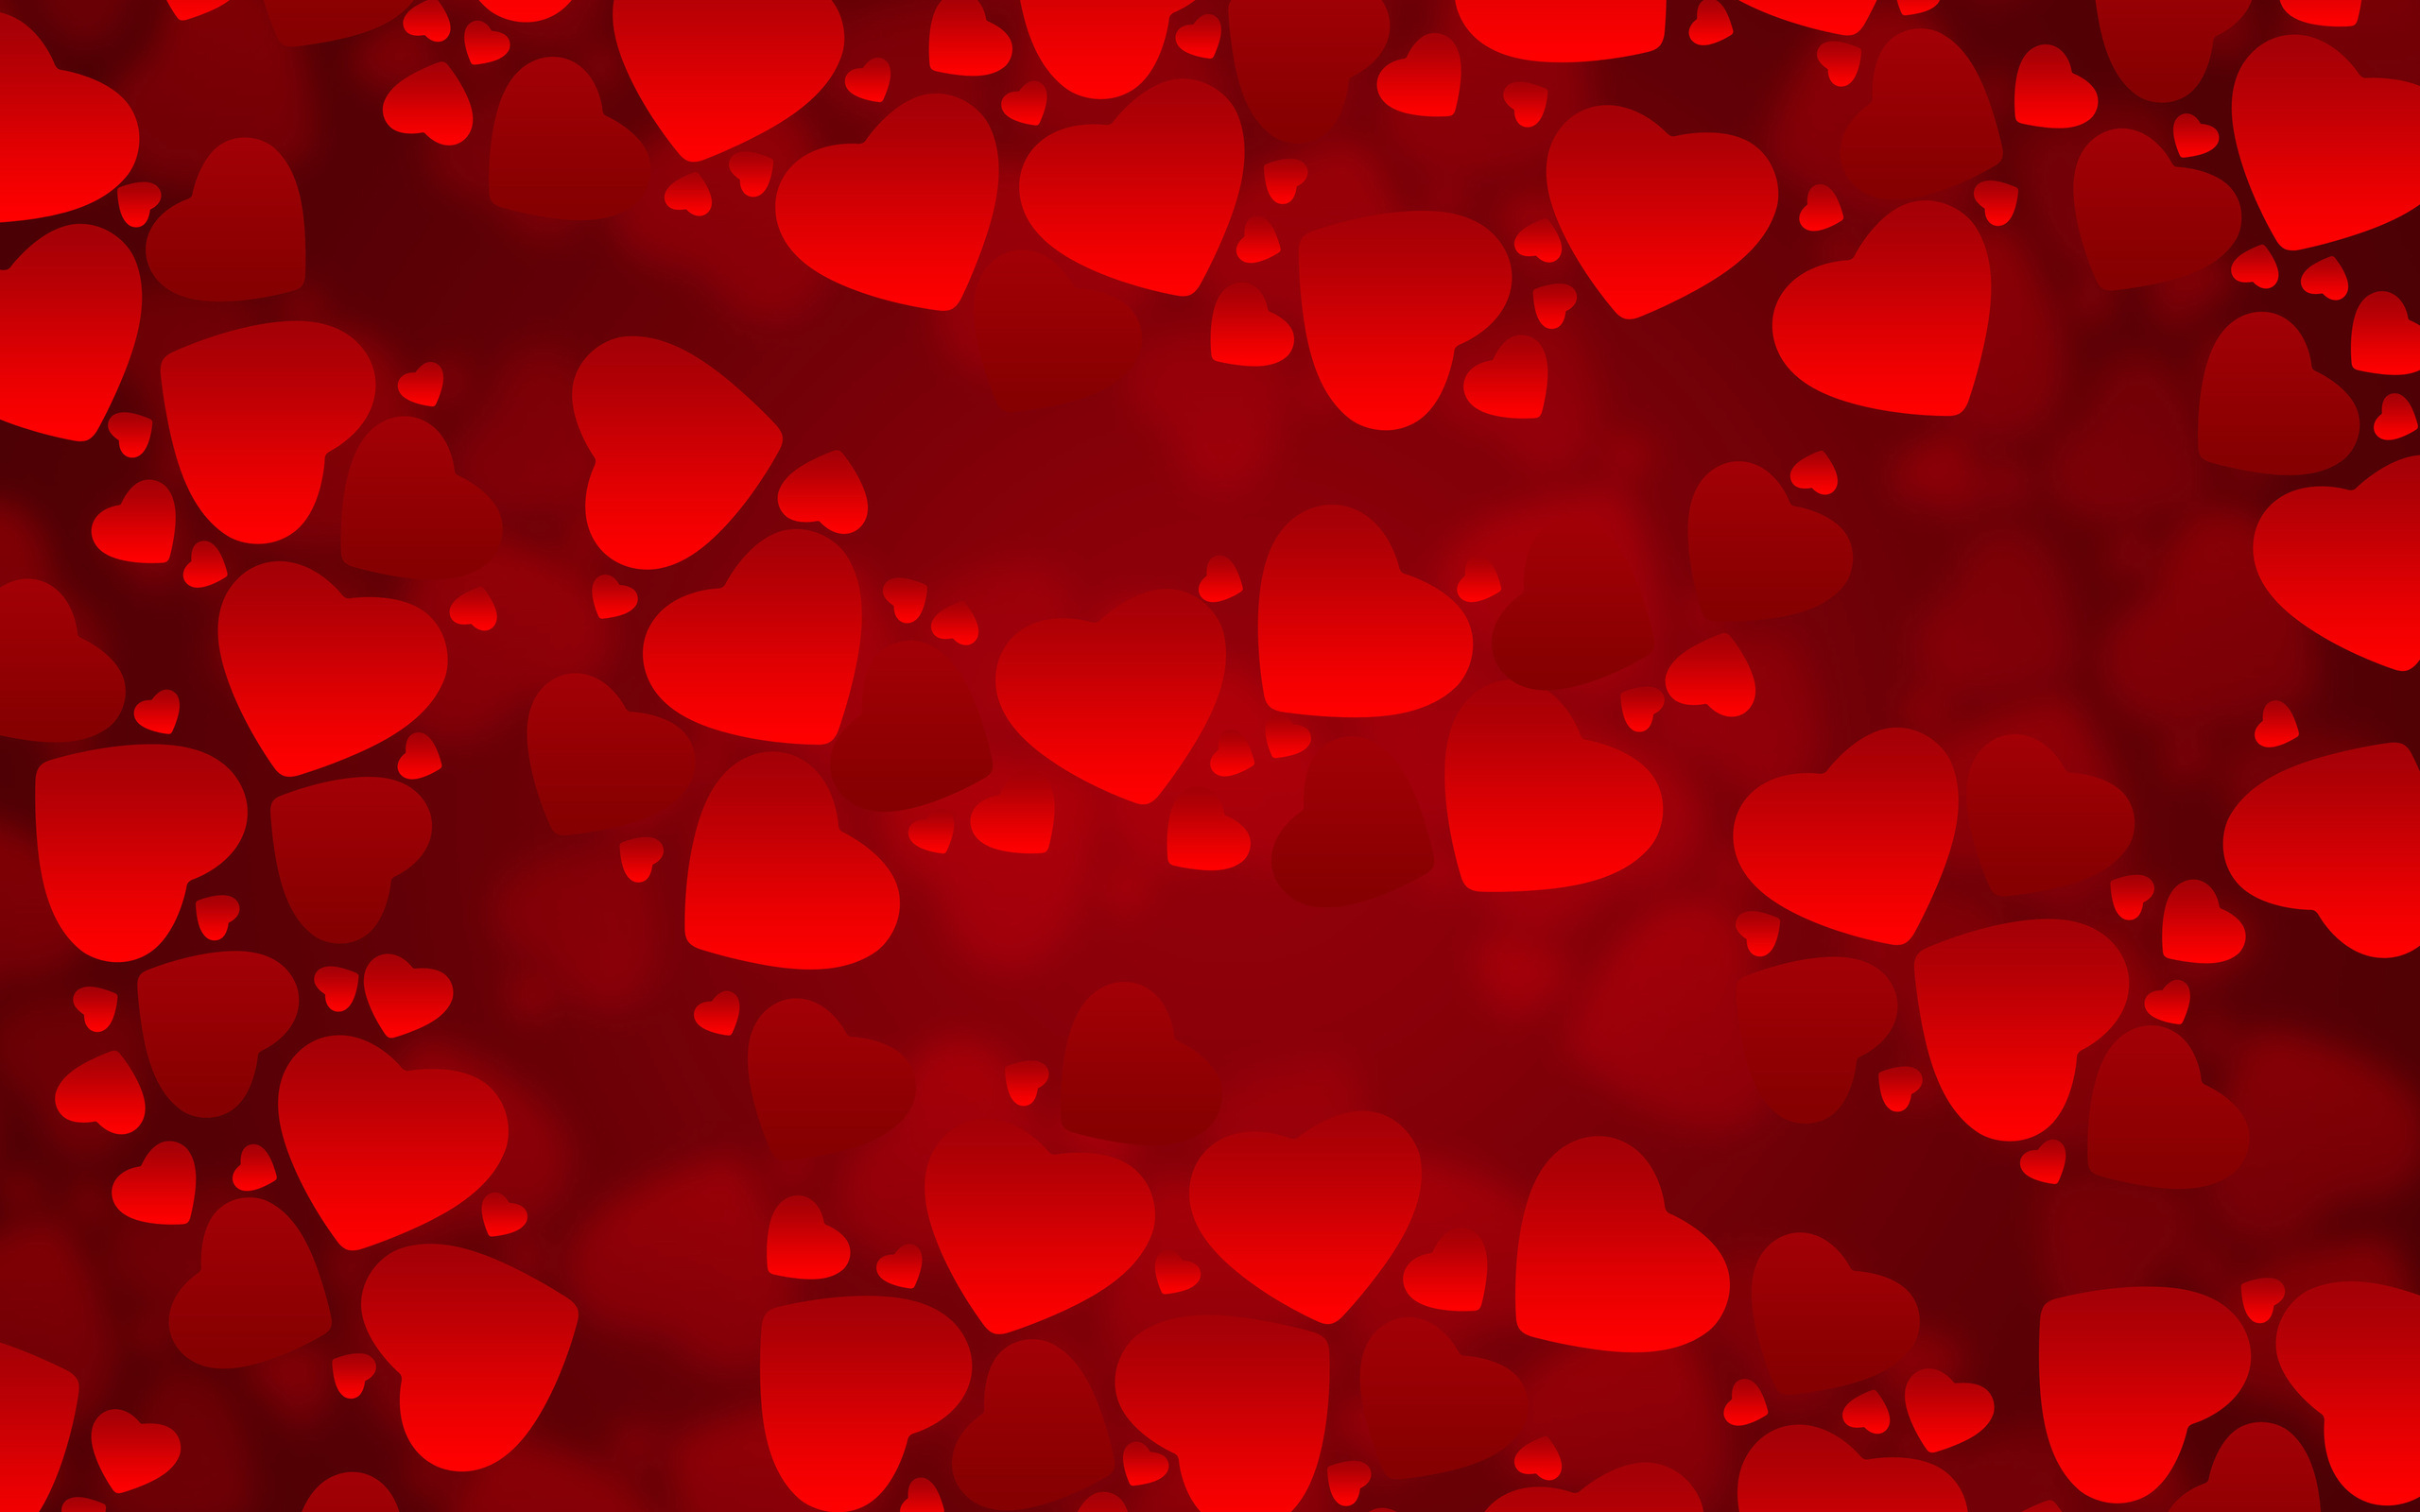 15239 download wallpaper background, hearts, love, valentine's day, red screensavers and pictures for free